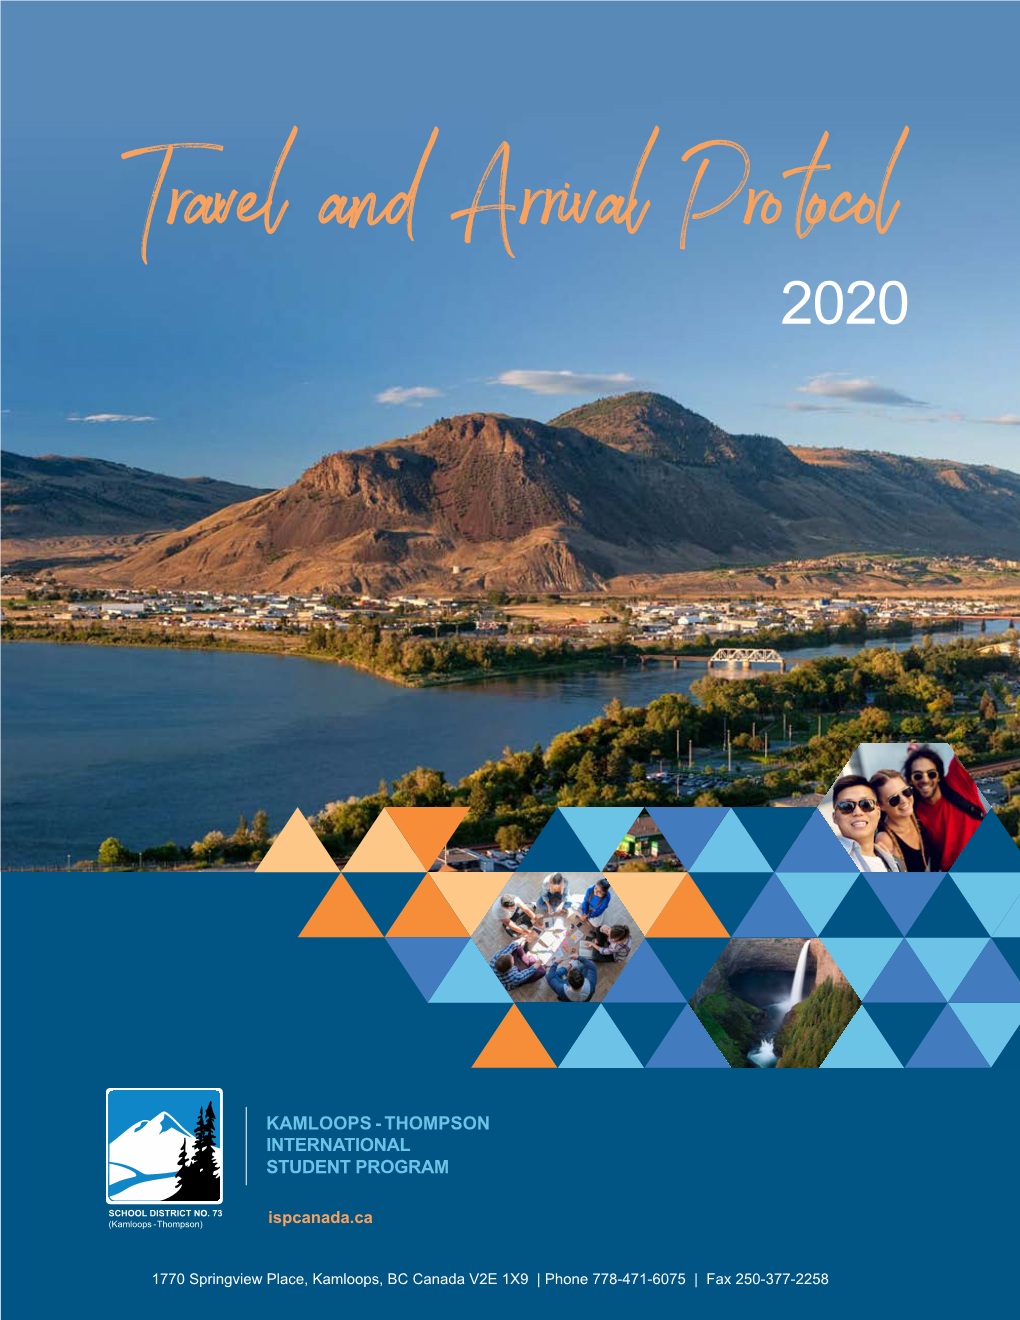 Travel and Arrival Protocol 2020